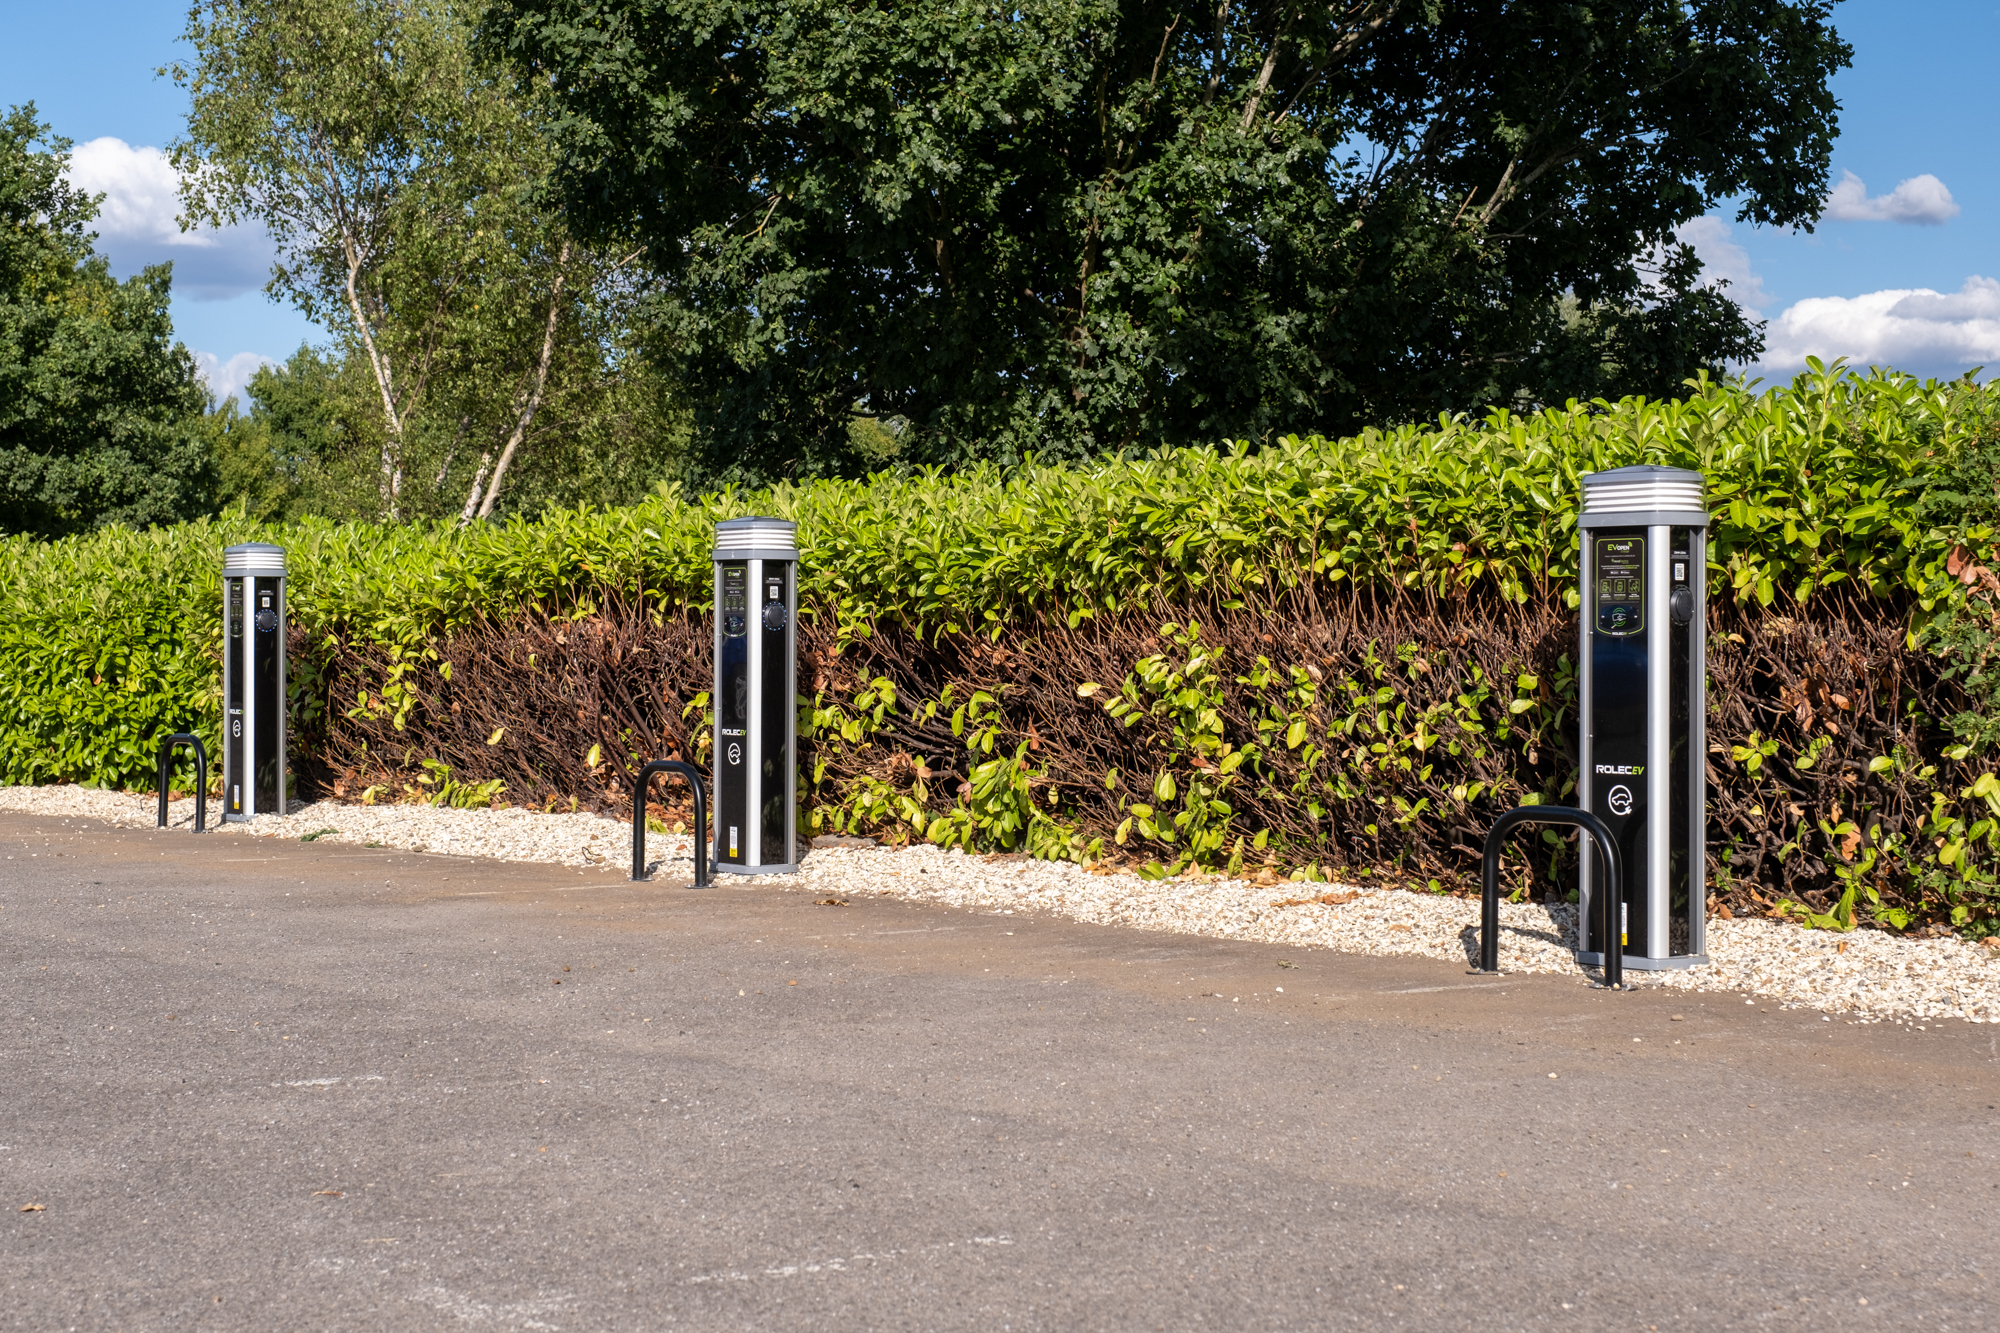 Electric vehicle chargers for Tannery Film Studios users as well as Tannery Office Tenants